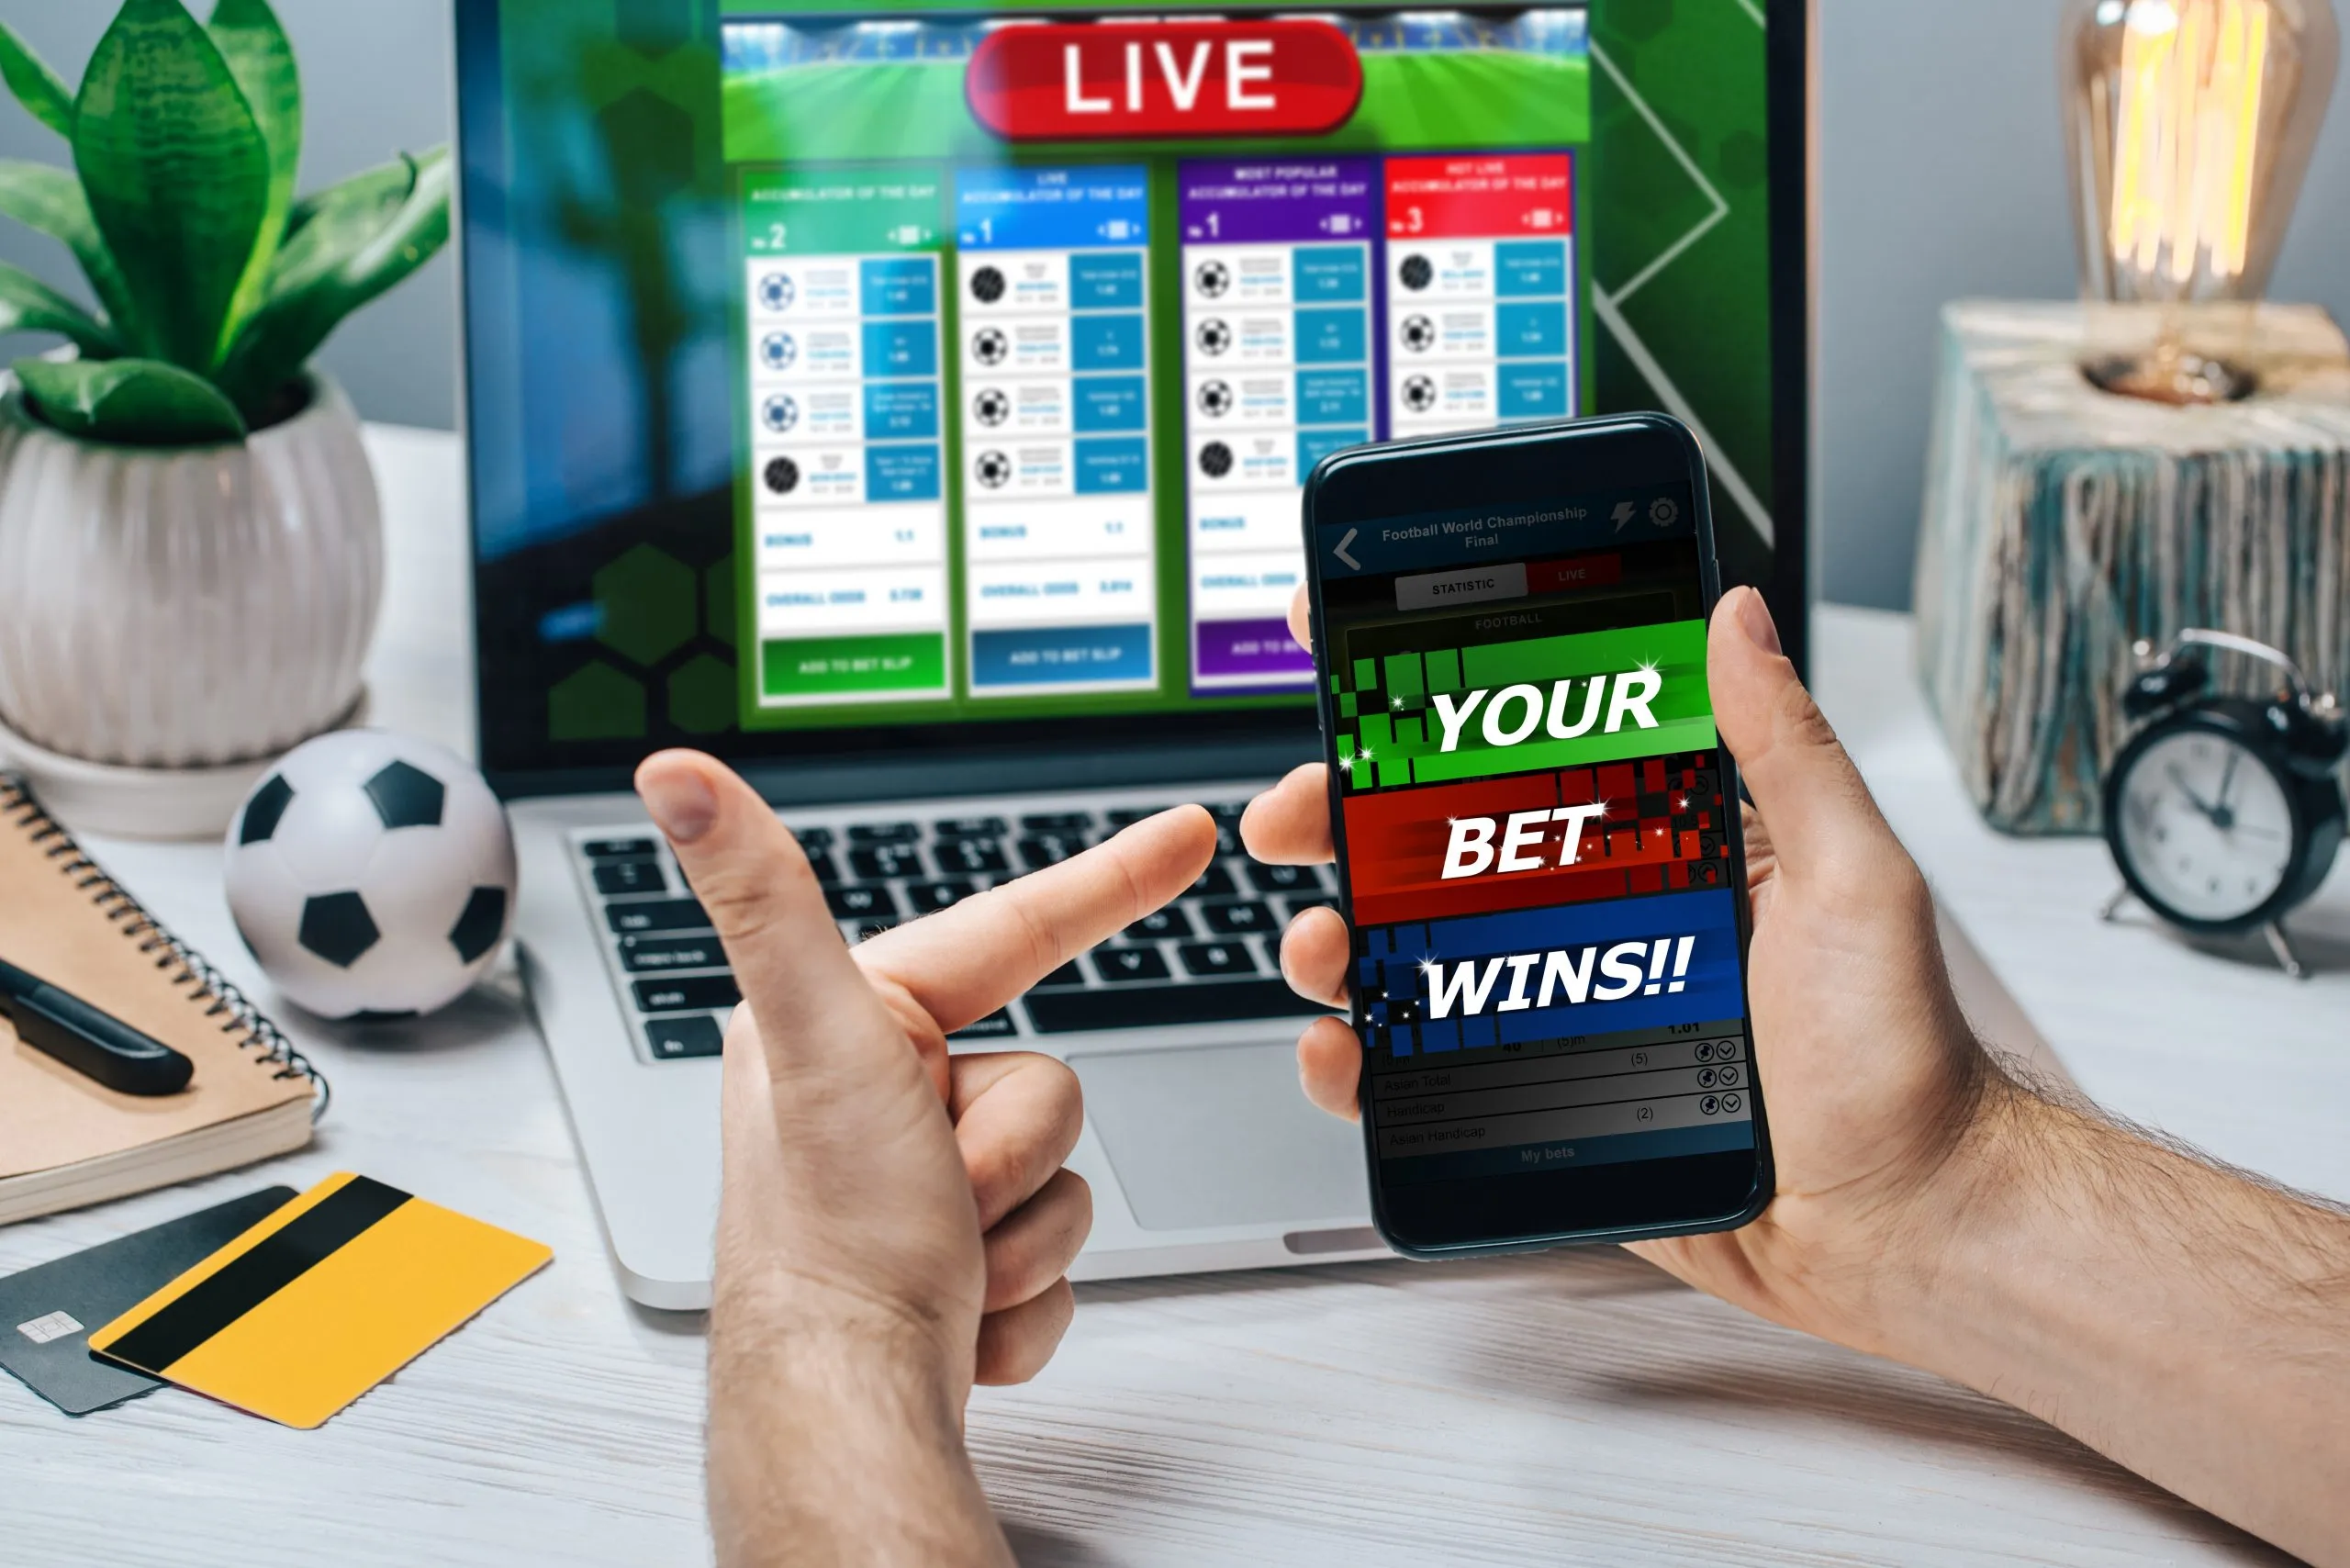 What are the top benefits of online sports betting sites?